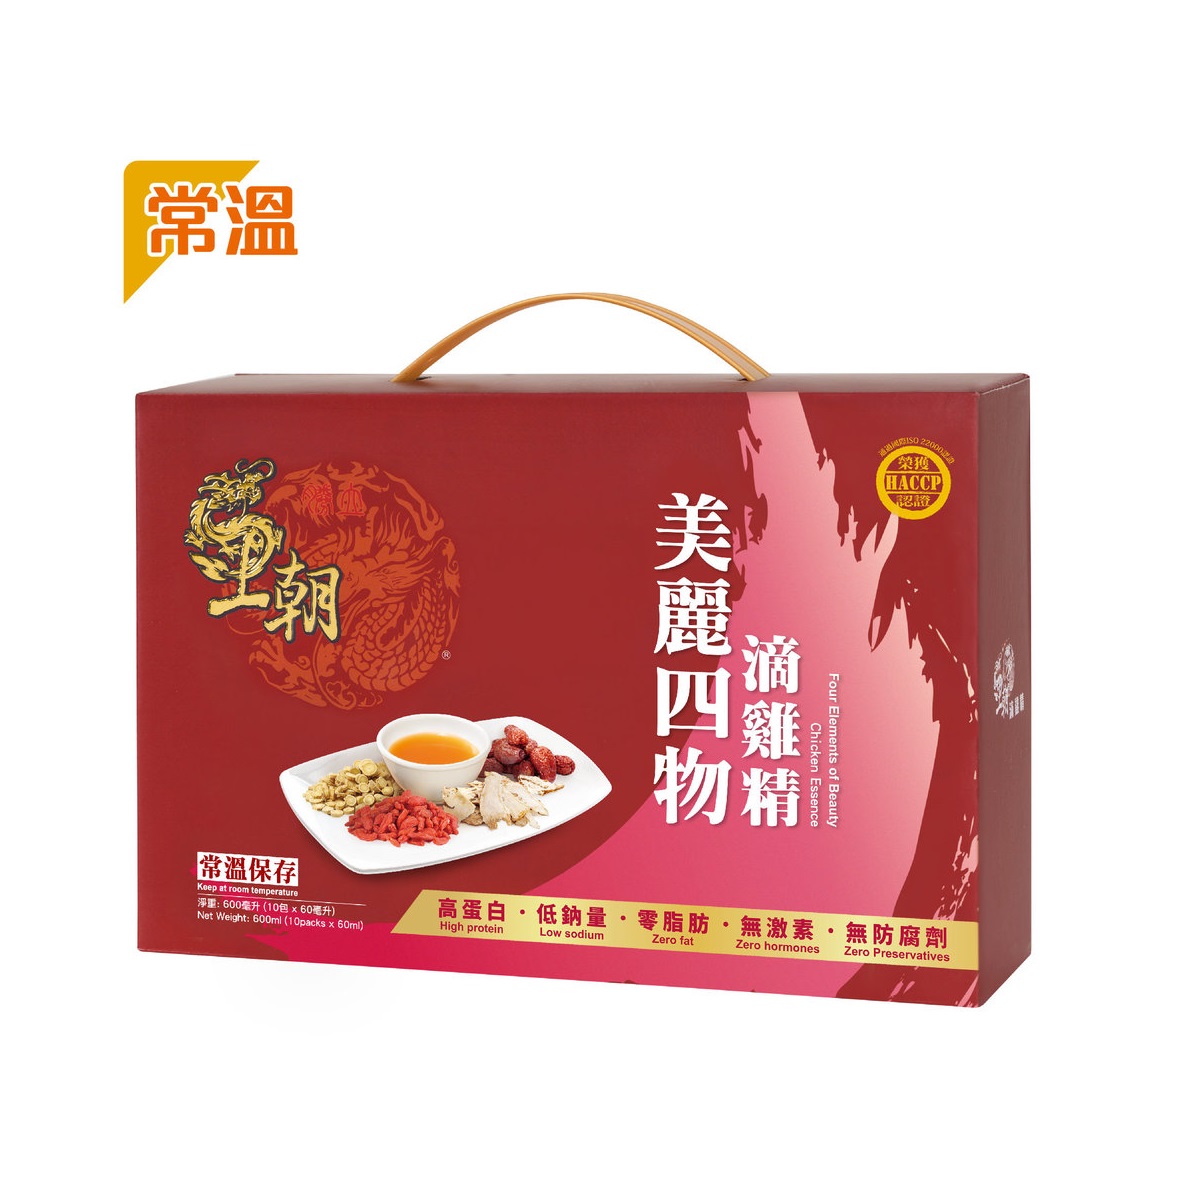 Wang Chao Chicken Essence (Four Element of Beauty Flavor) (Ambient - 10 Packs) Budle of 2